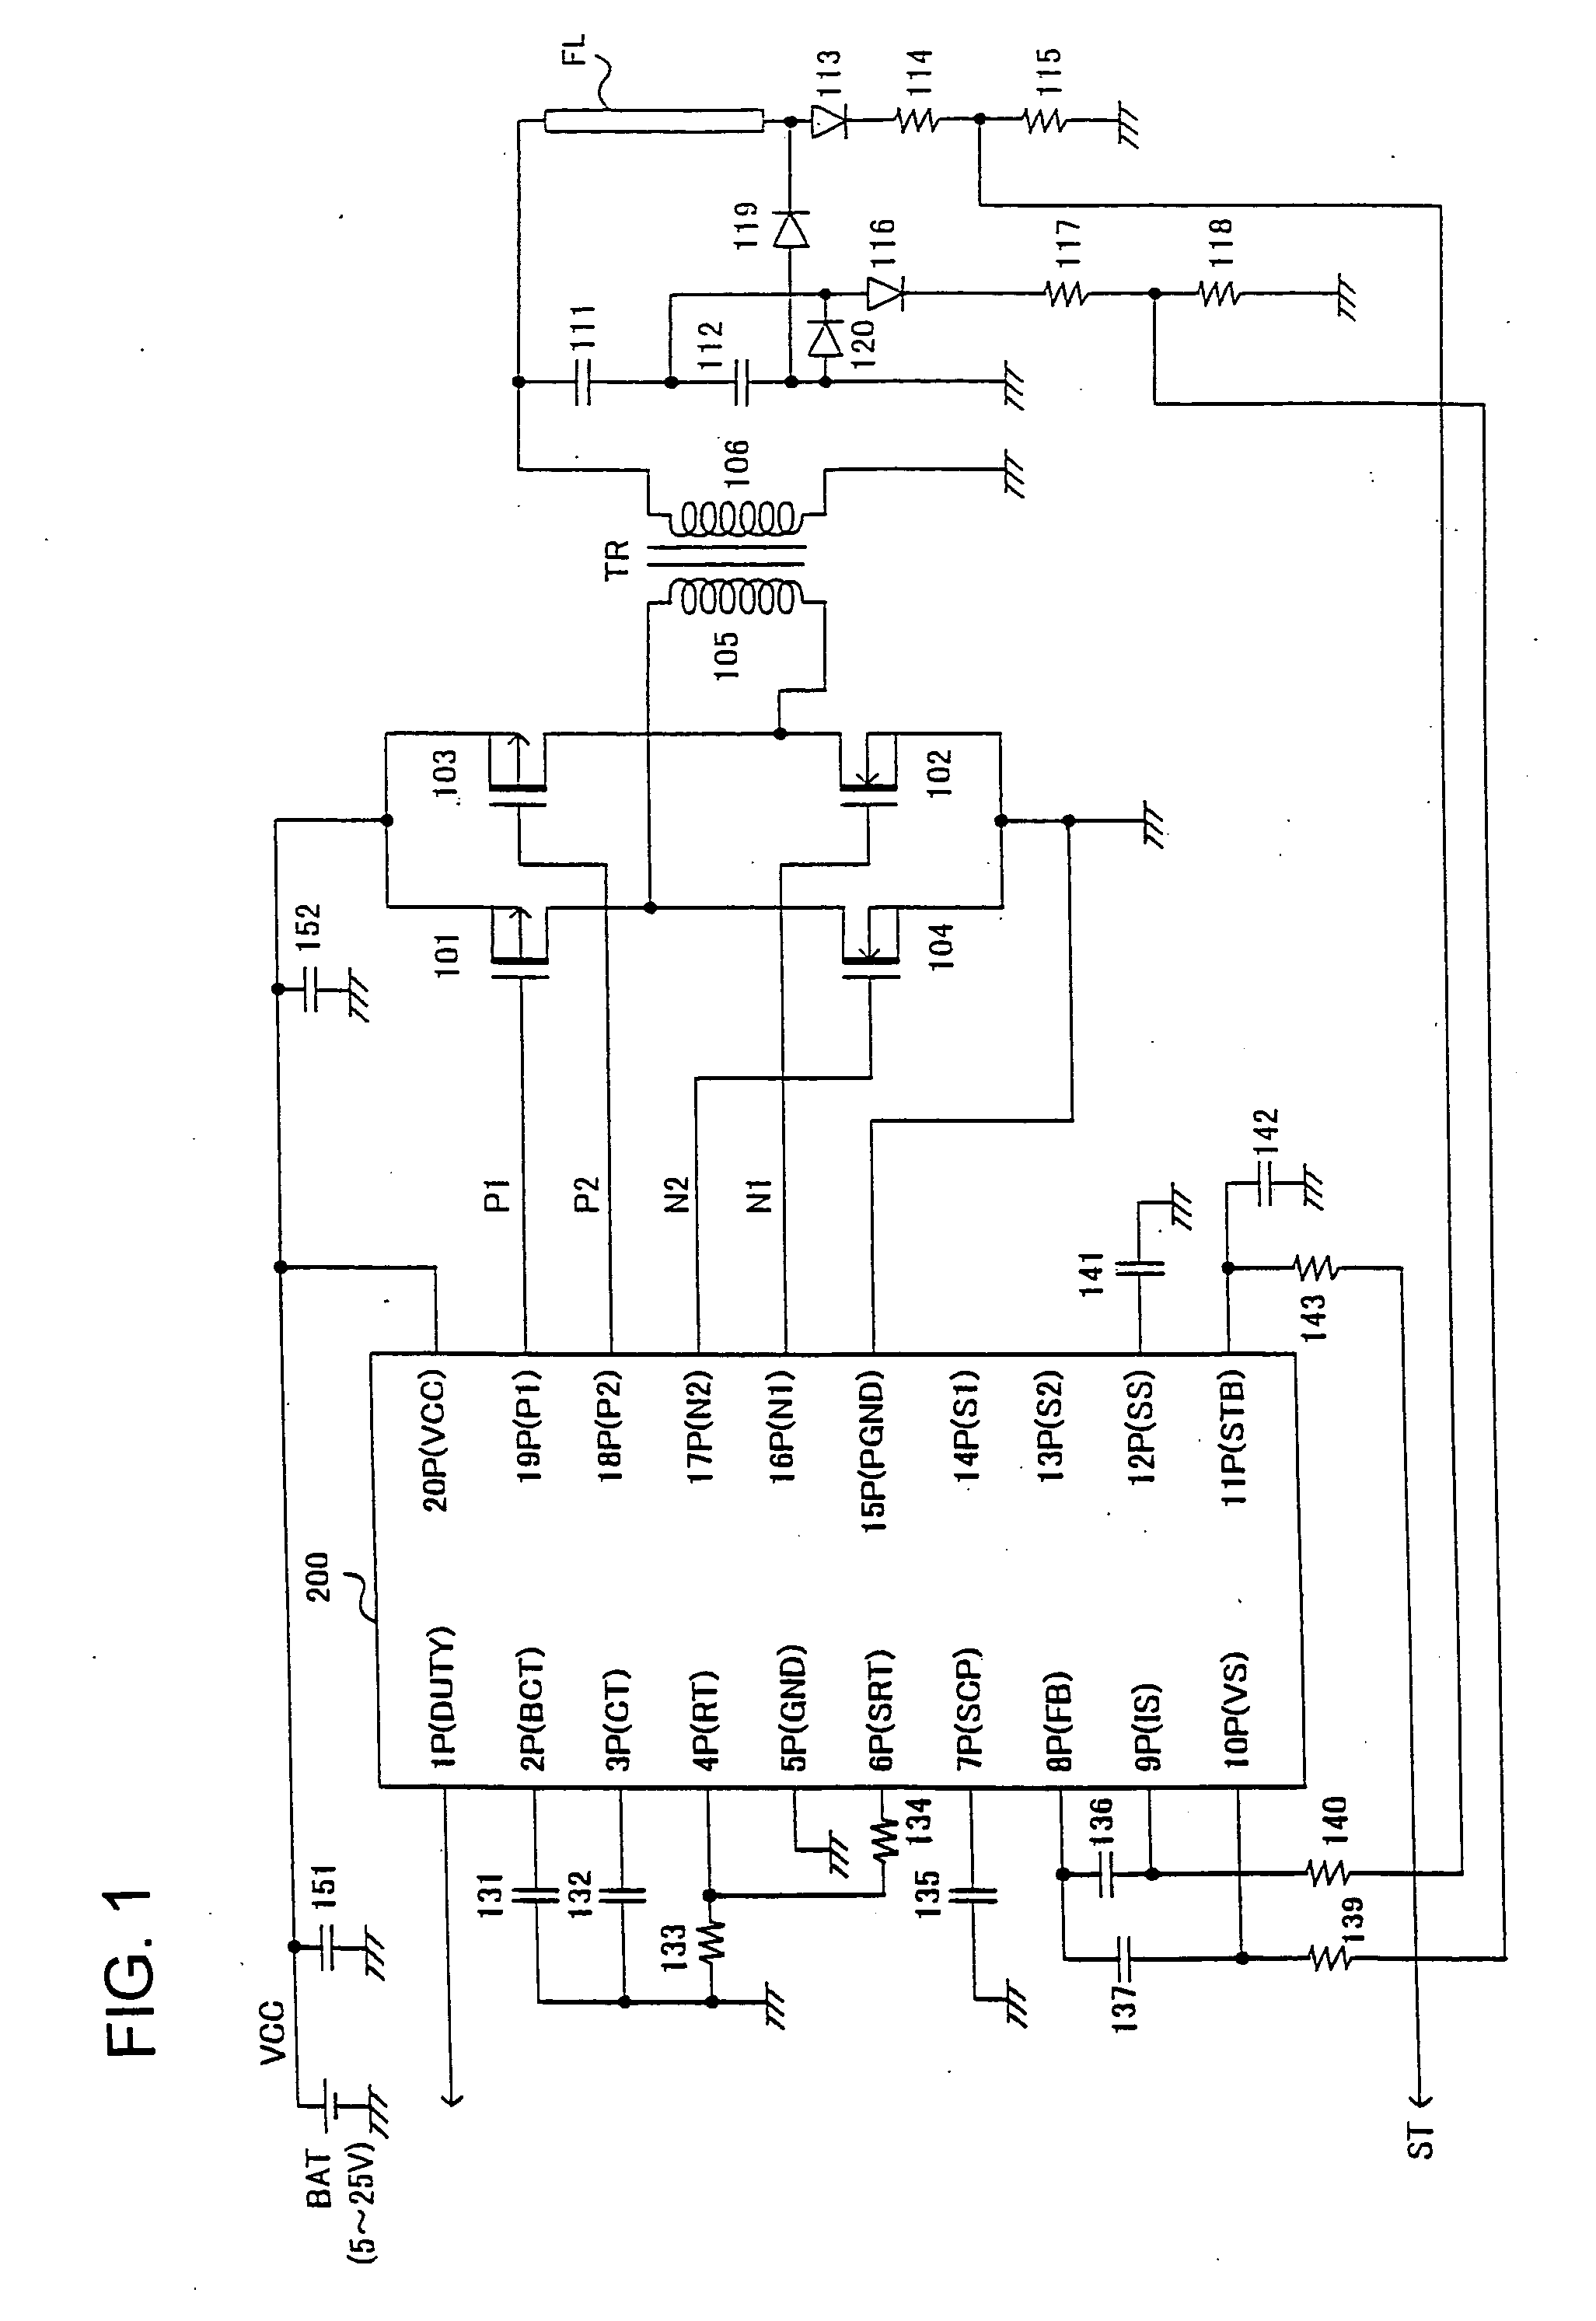 Dc/ac converter and its controller ic